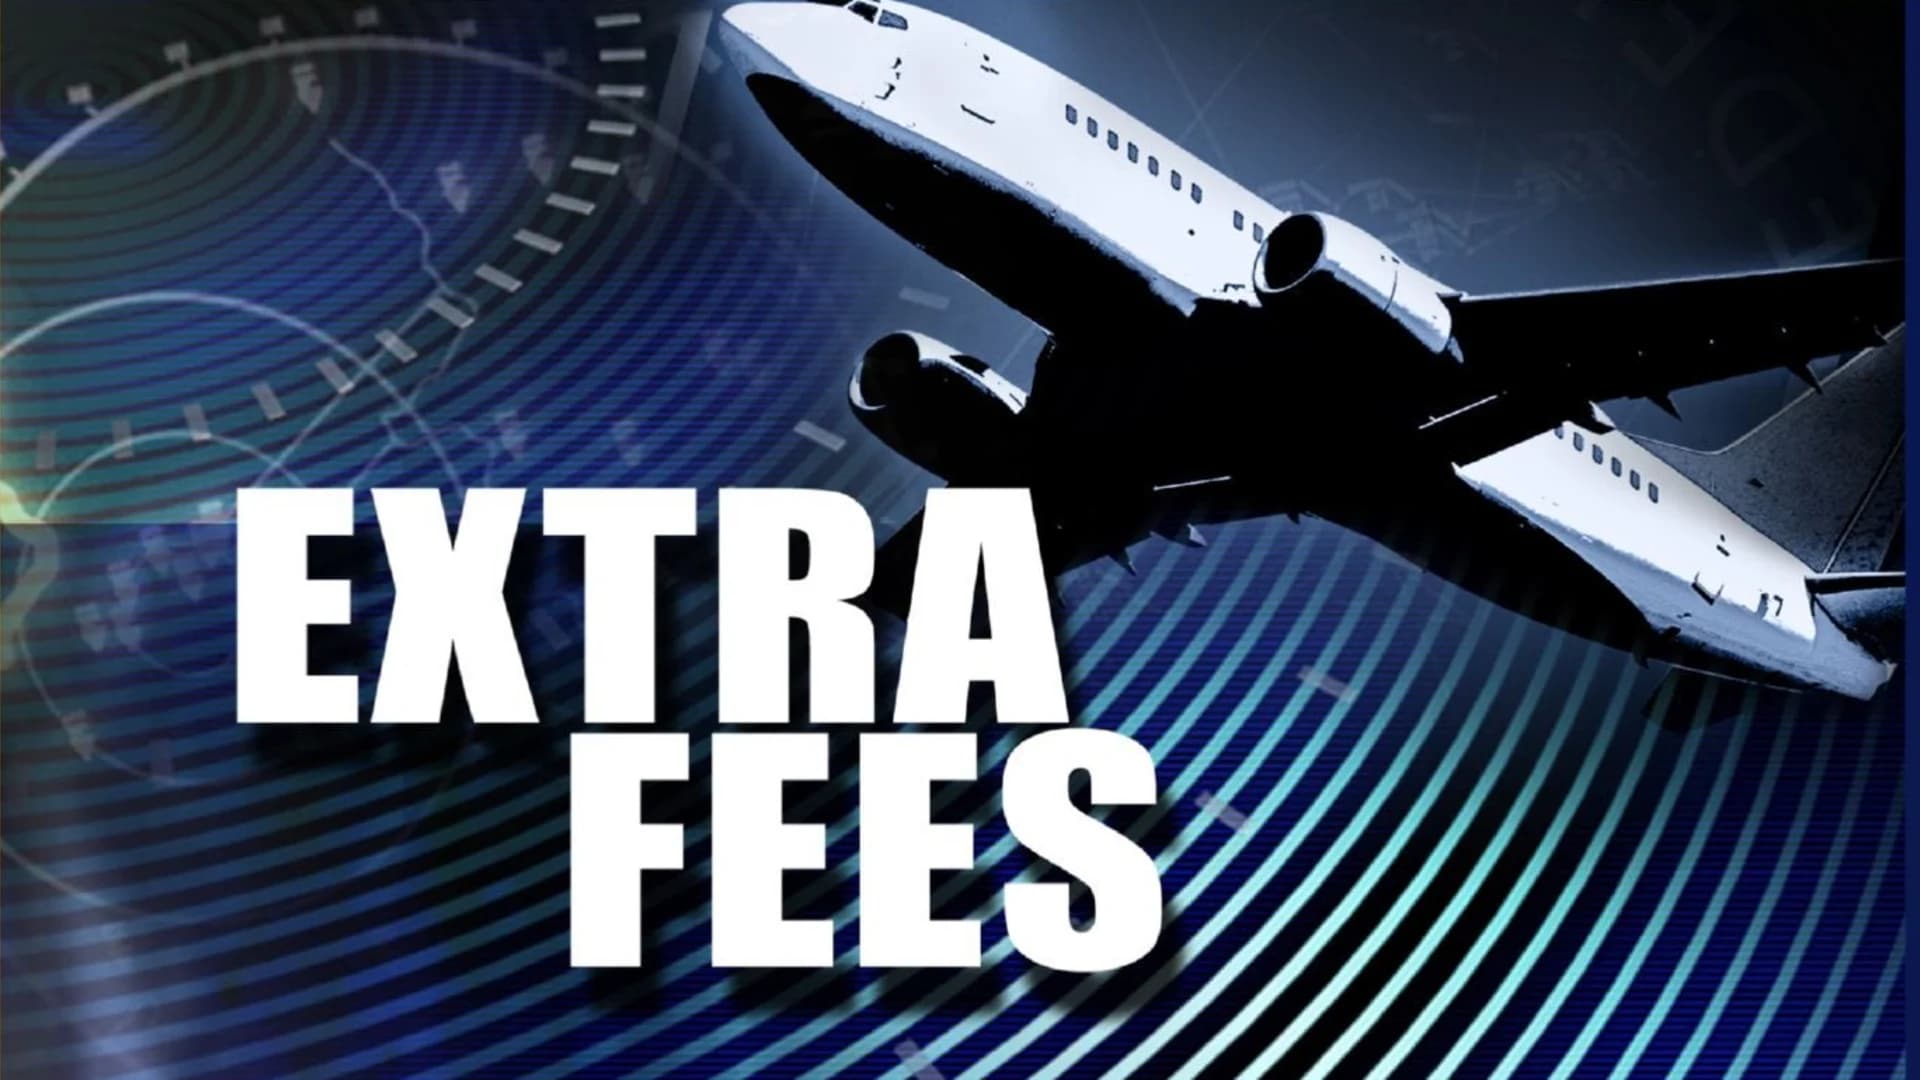 Don’t be fooled: Traveling gets expensive with a host of hidden fees